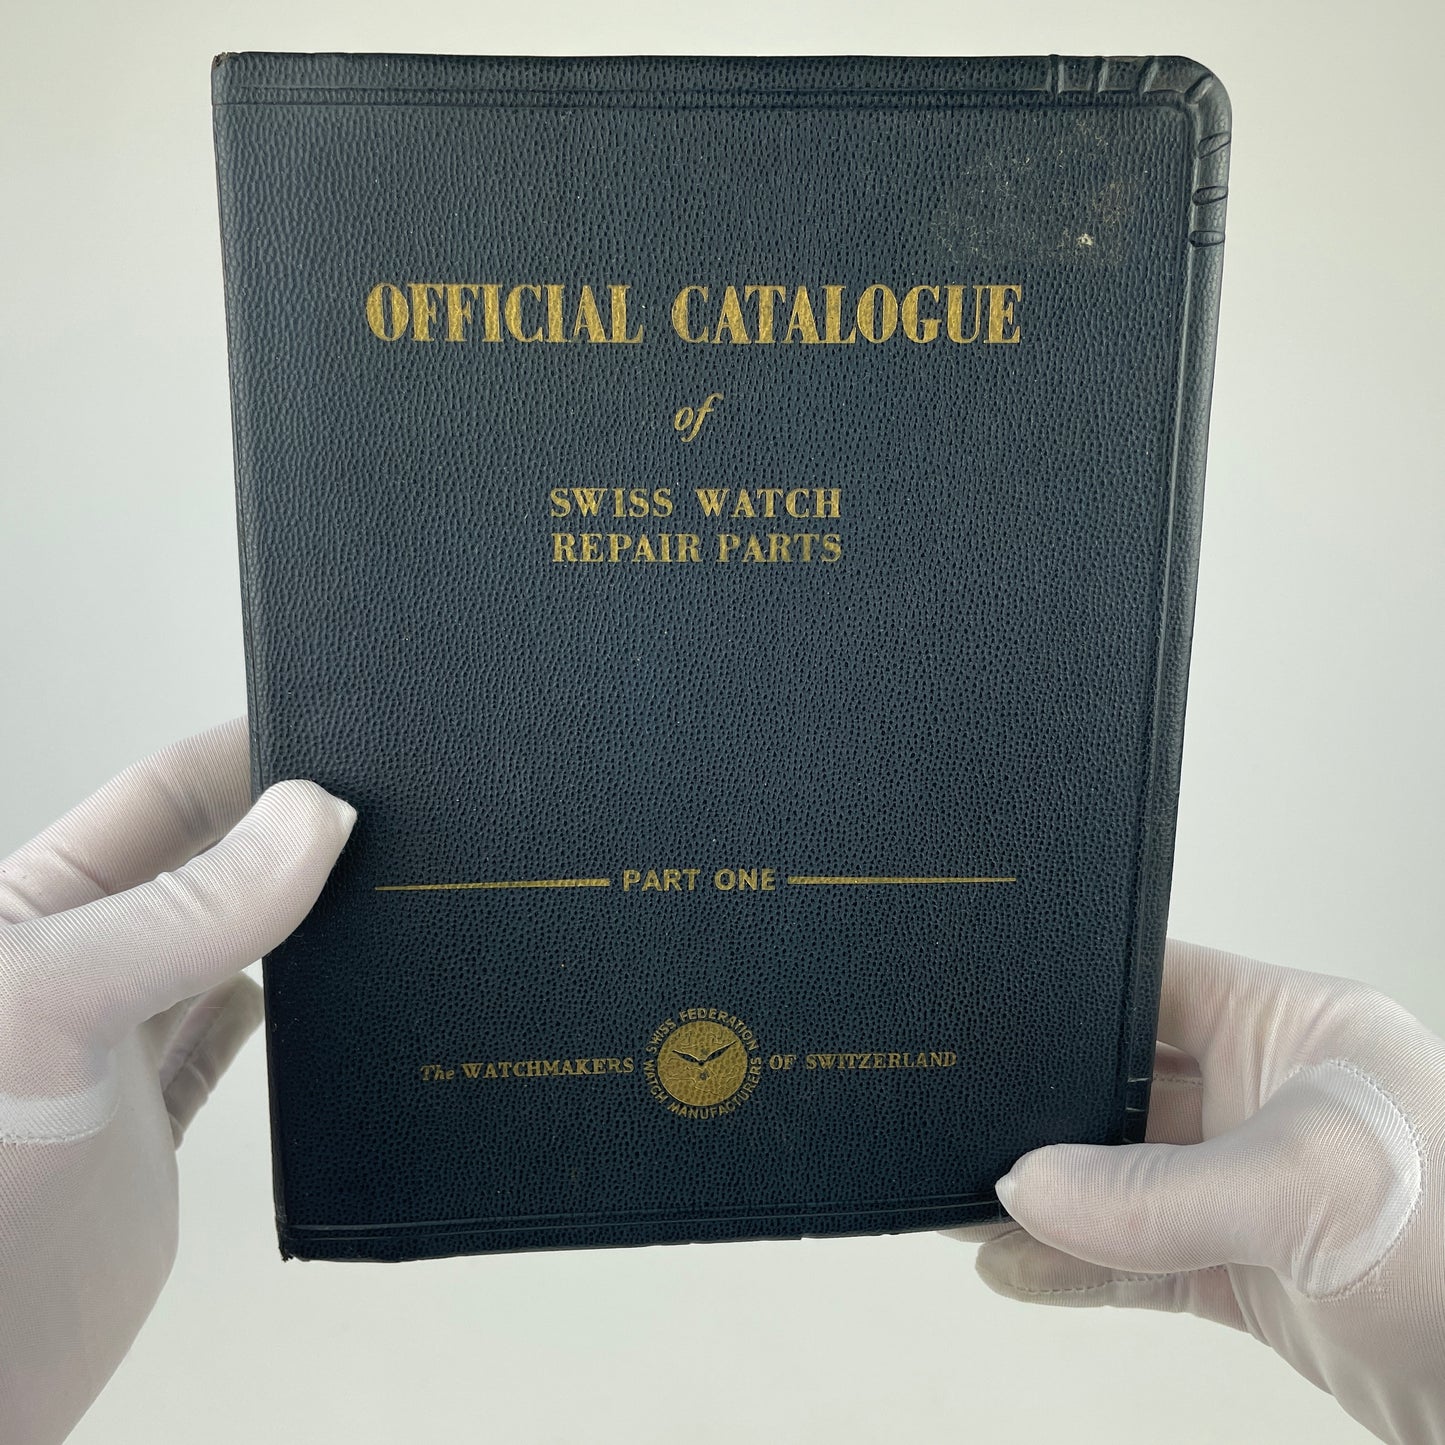 Official Catalog of Swiss Watch Parts Volumes 1 & 2